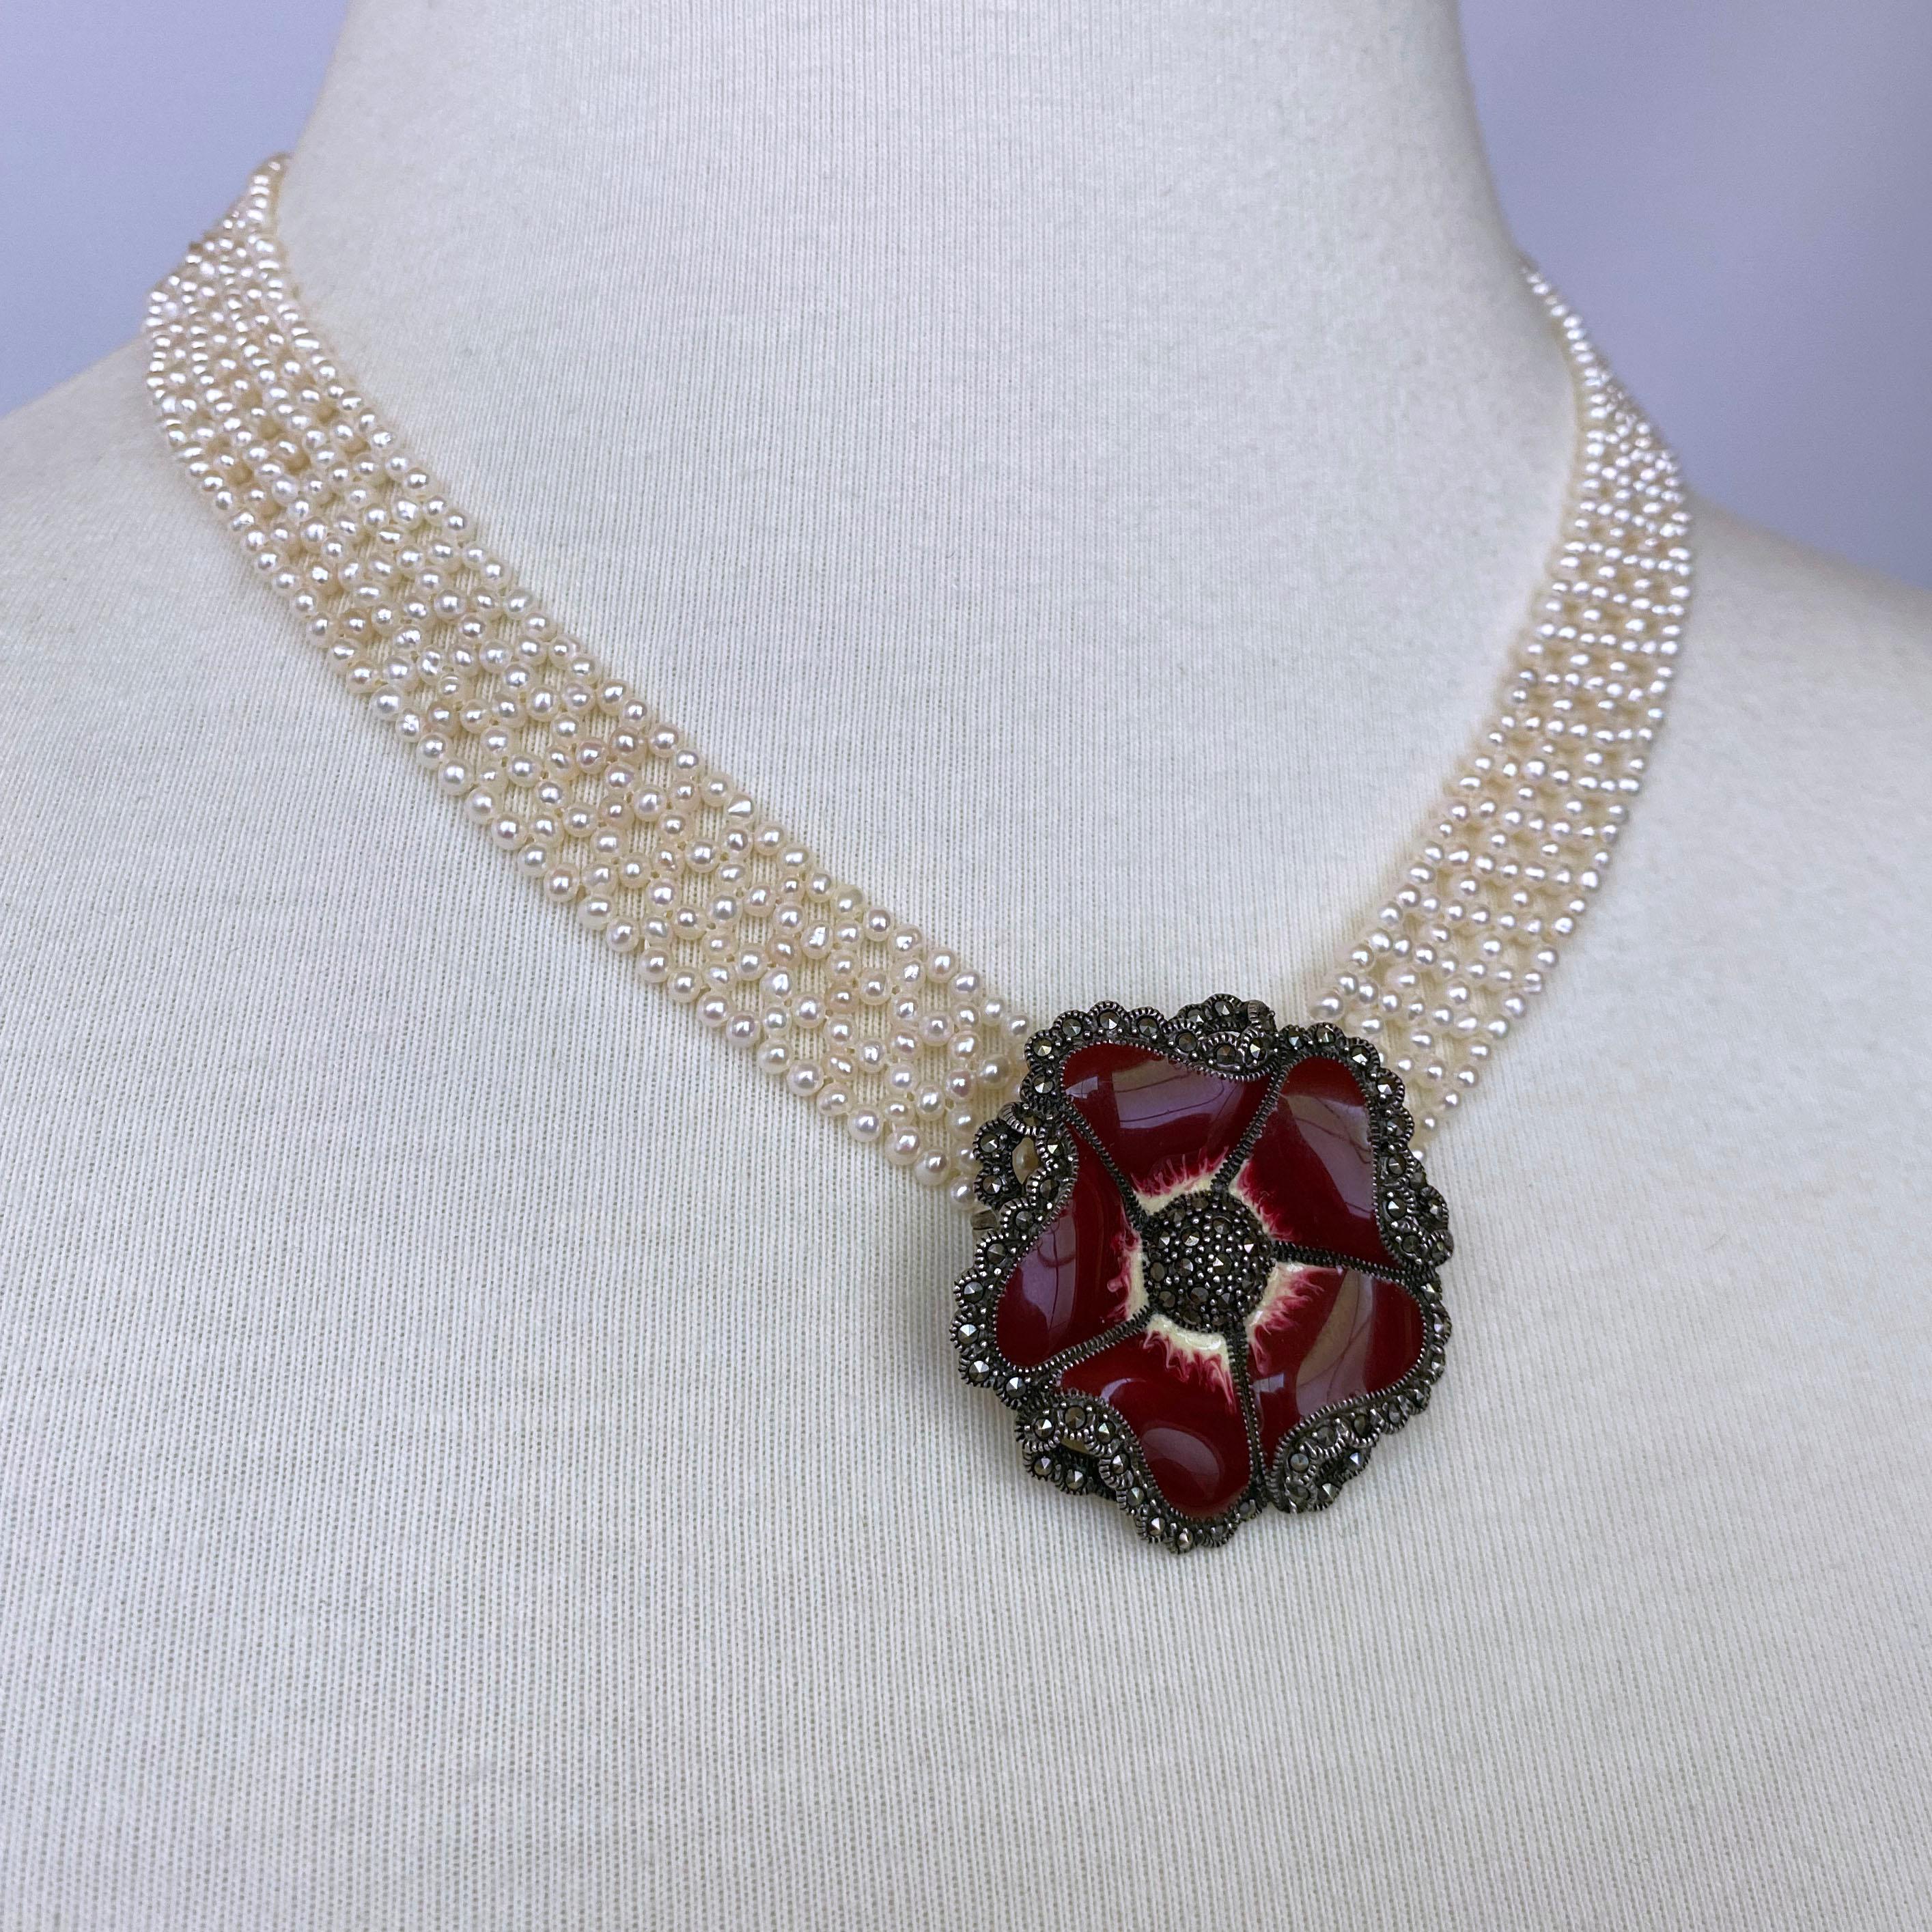 Artist Marina J Woven 'V' Shaped Pearl Necklace with Vintage Brooch